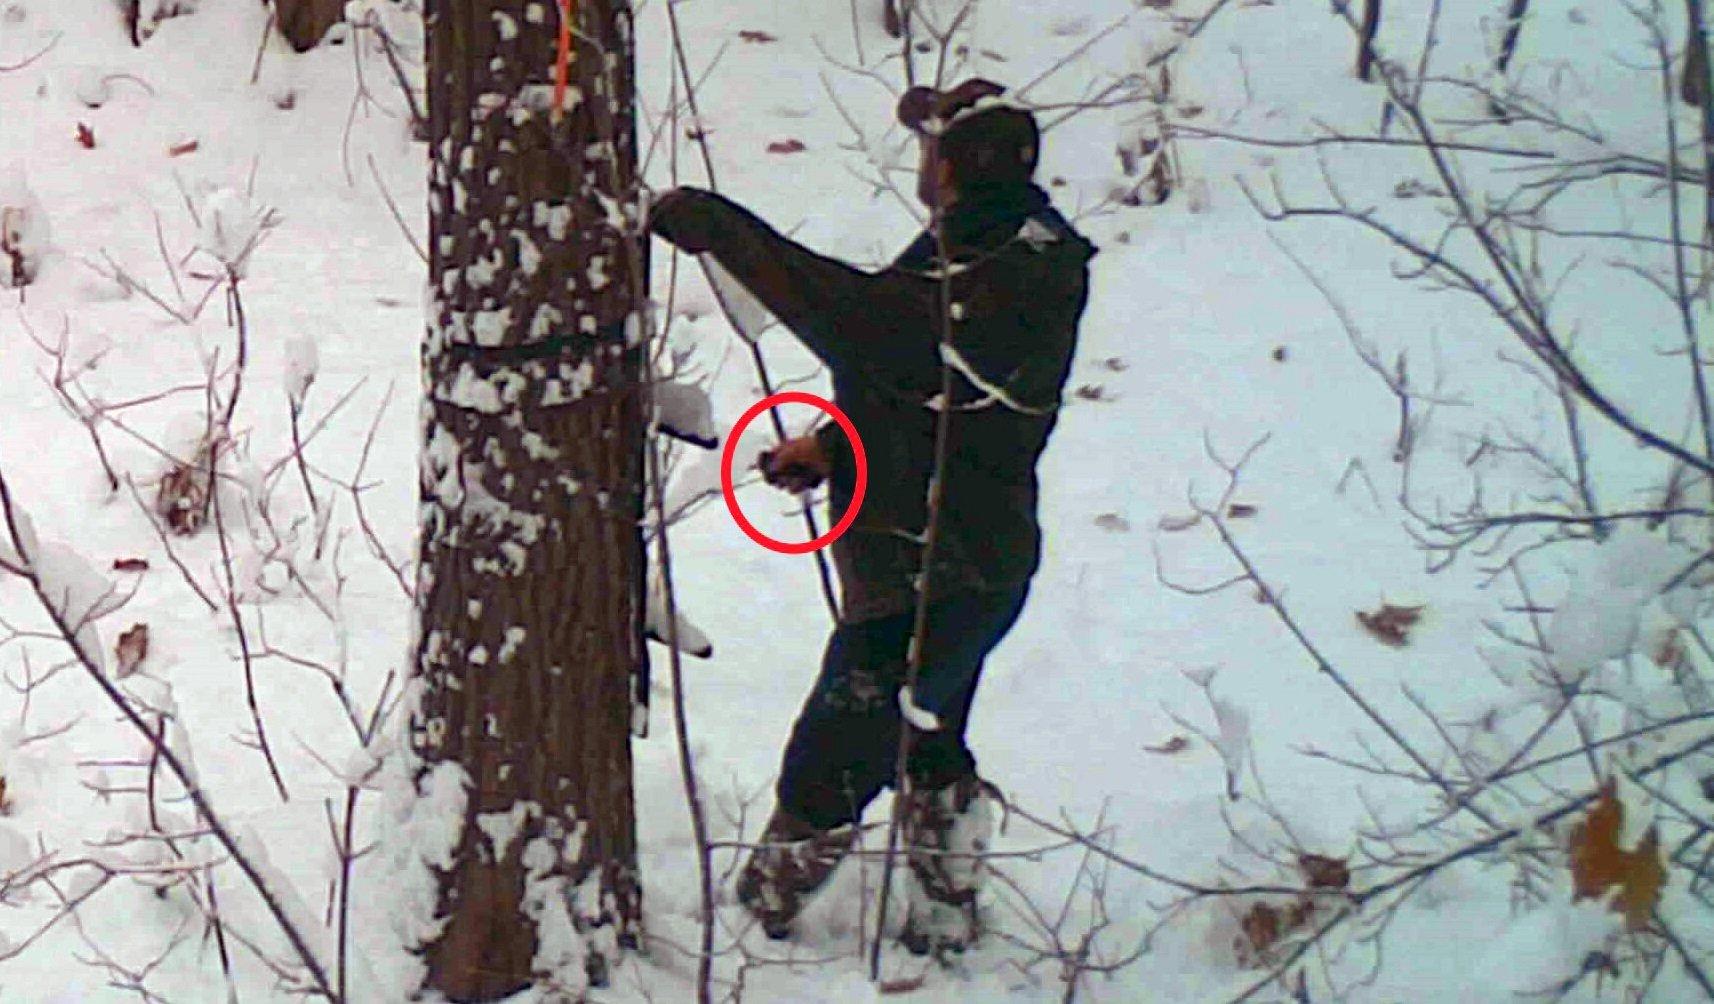 Footage from a trail camera shows Thomas Steele III, 23, intentionally cutting the straps on a hunter's treestand. Image by Michigan Department of Natural Resources